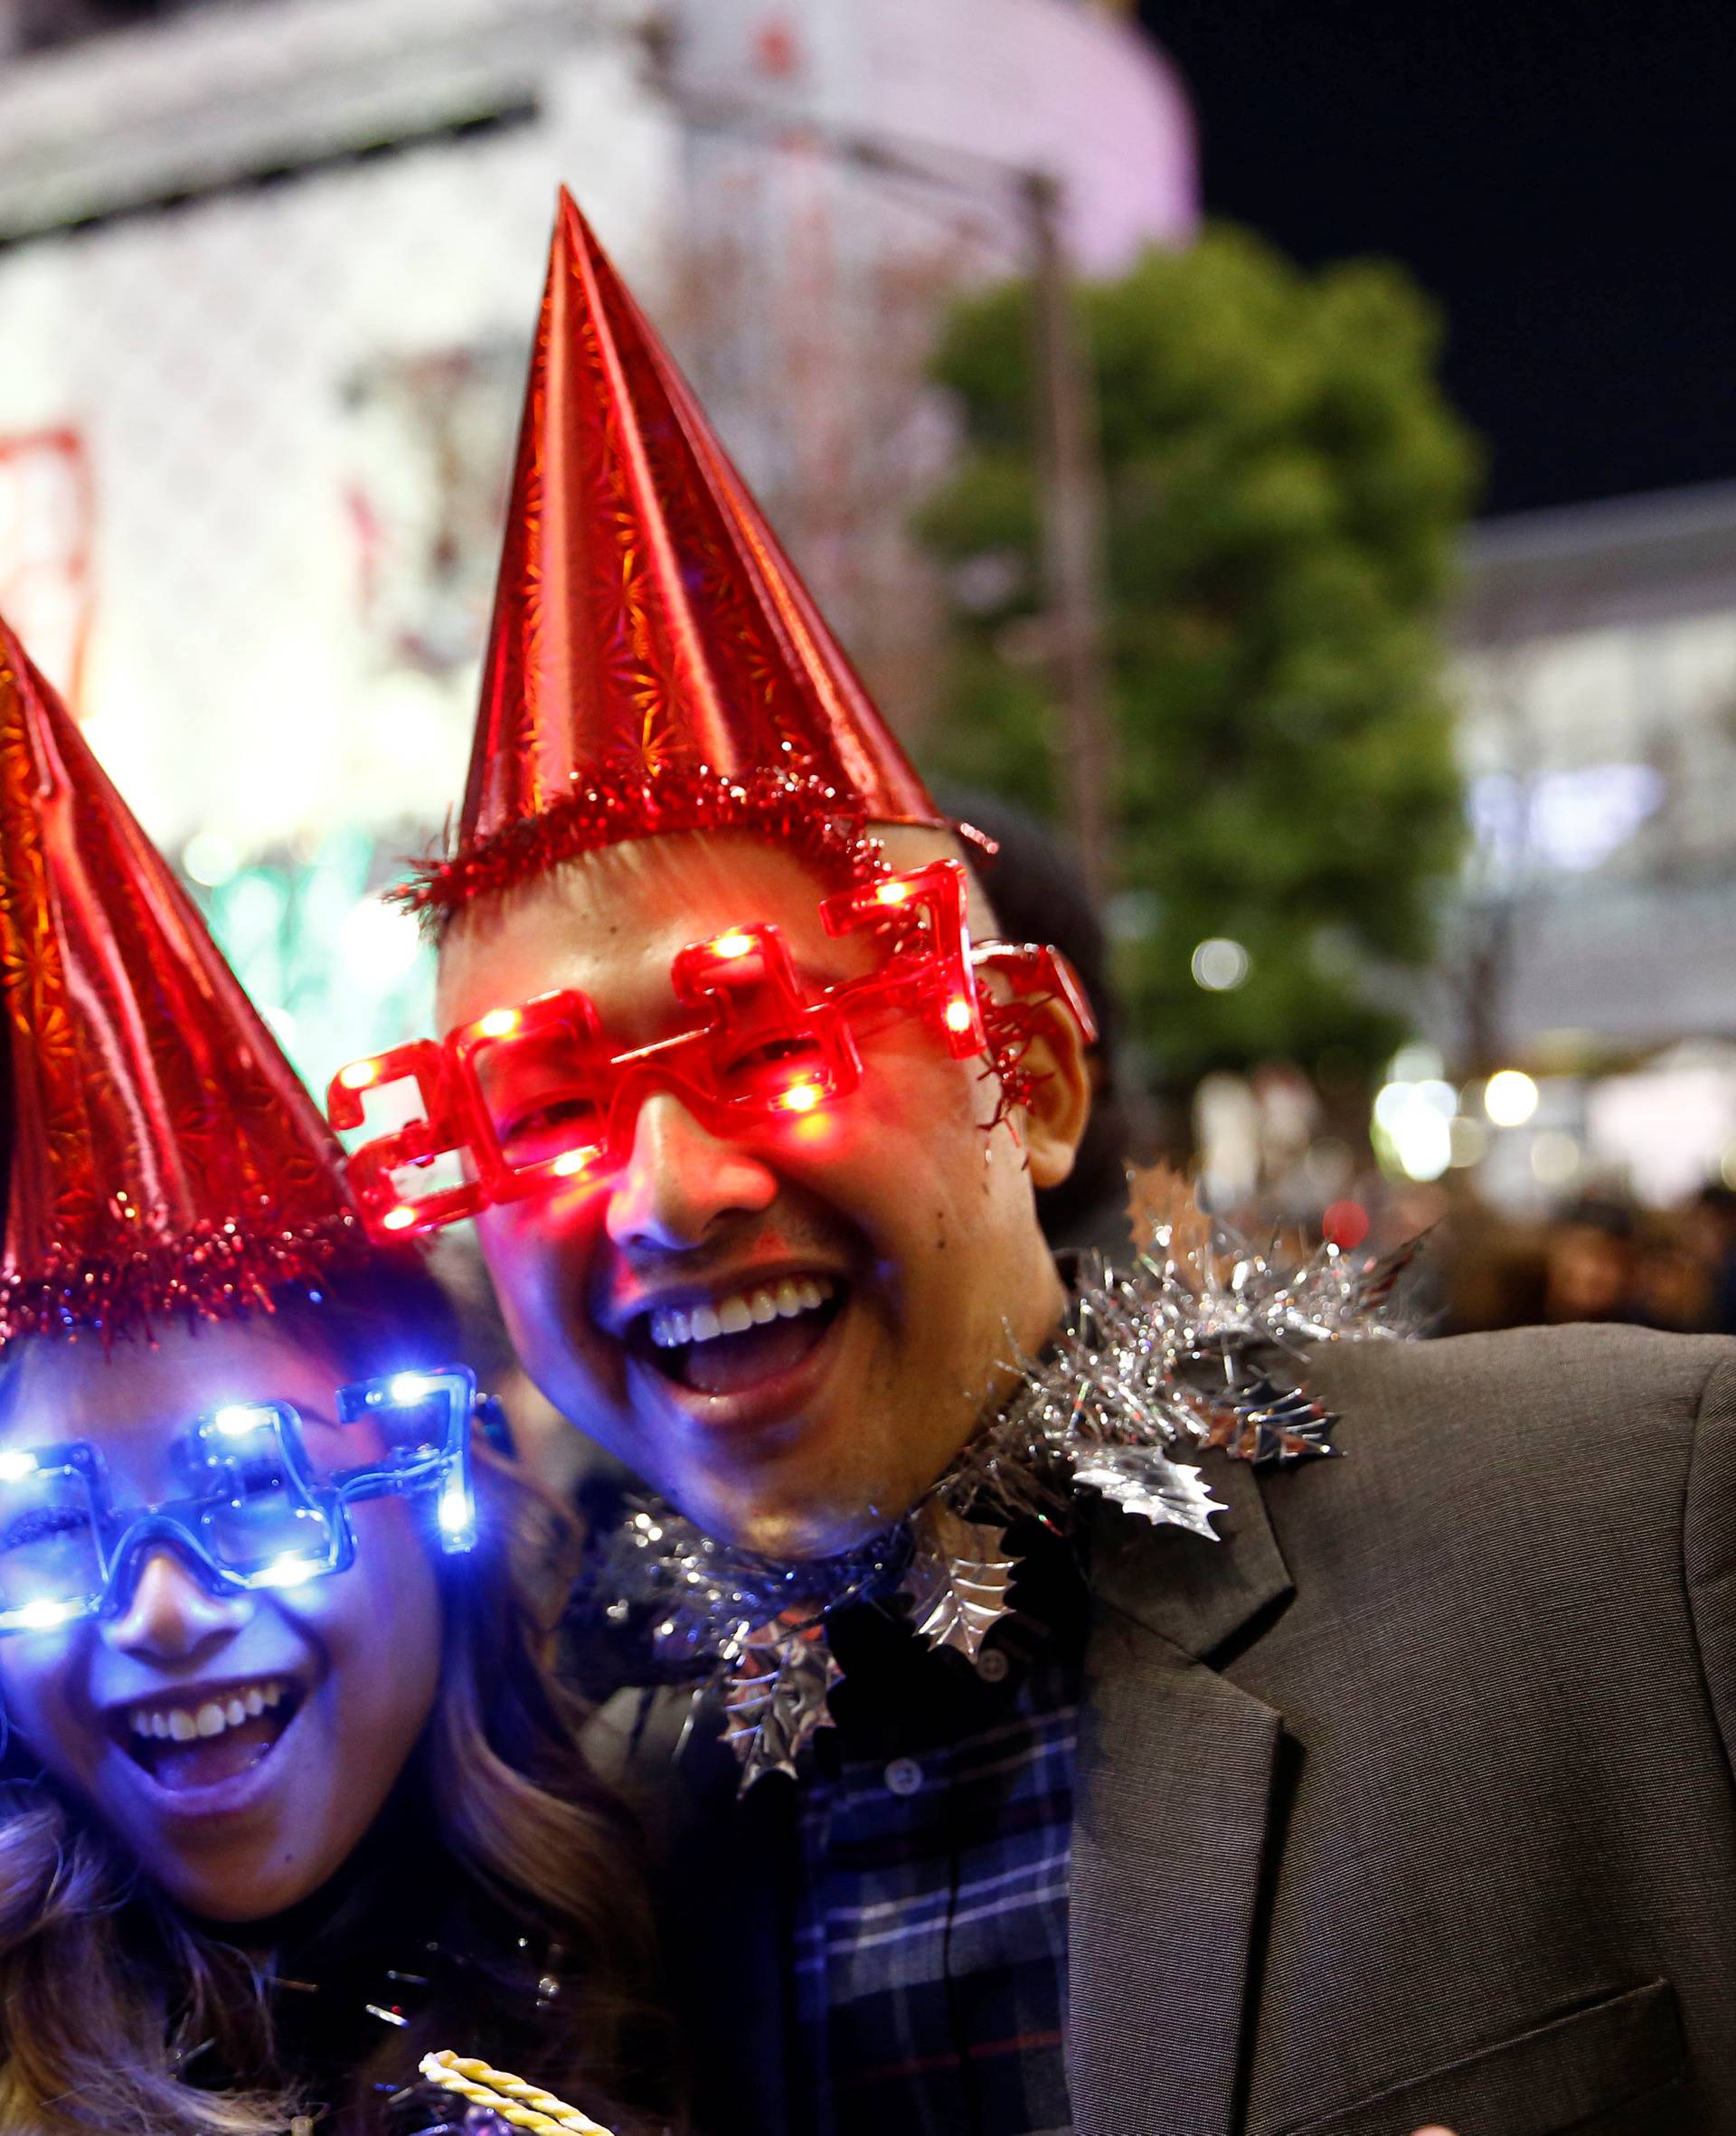 Revellers wearing glasses in the shape of 2017 pose during a new year countdown event at Shibuya crossing in Tokyo, Japan